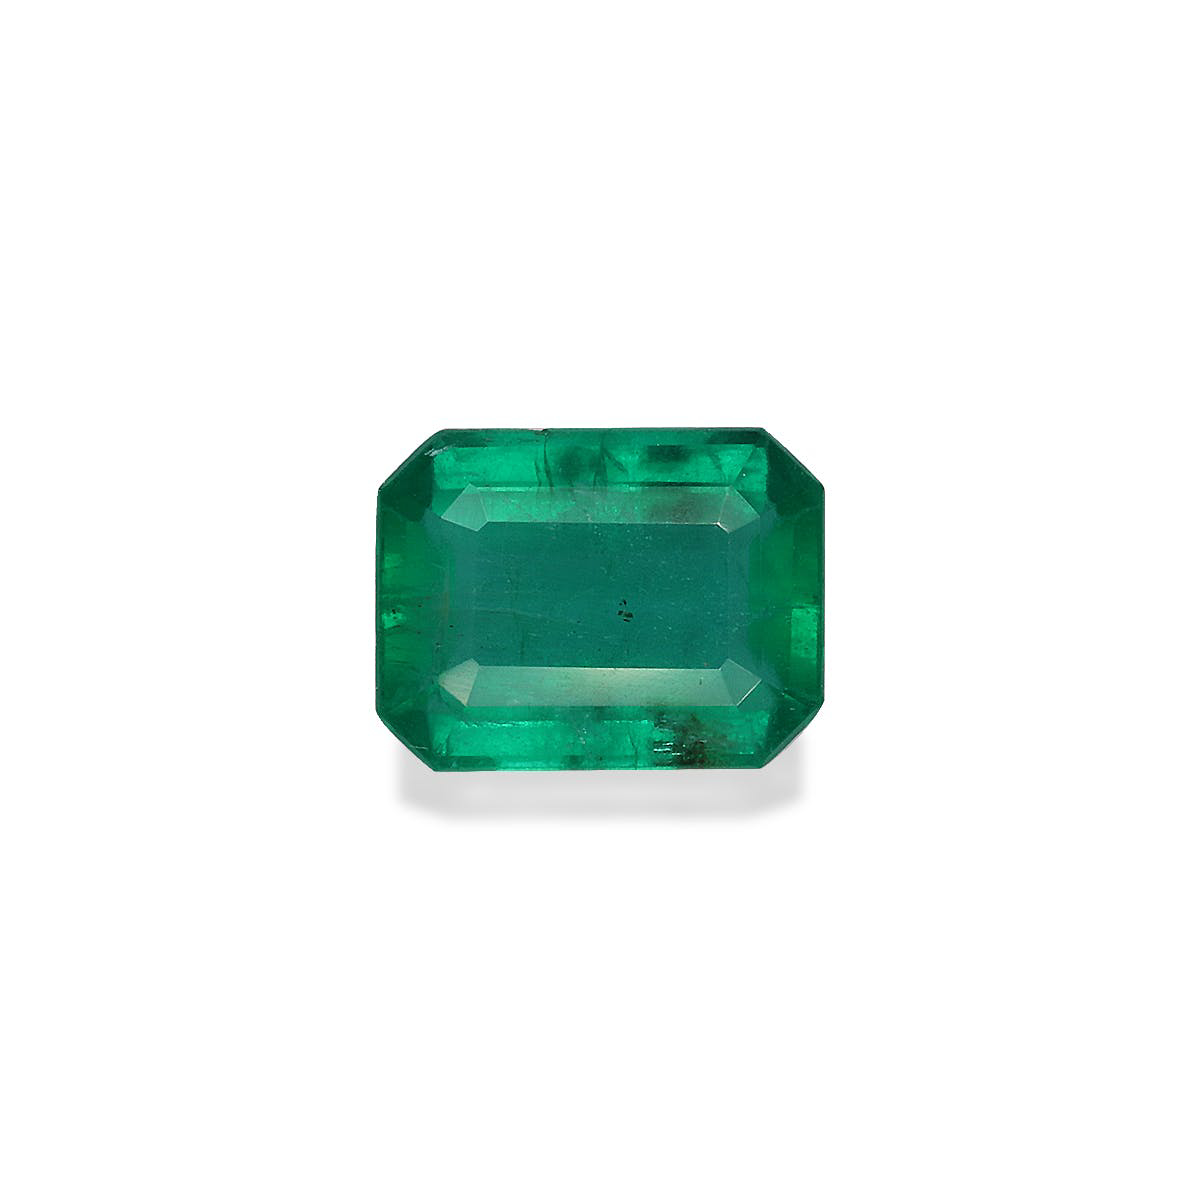 Picture of Green Zambian Emerald 1.76ct - 9x7mm (PG0228)